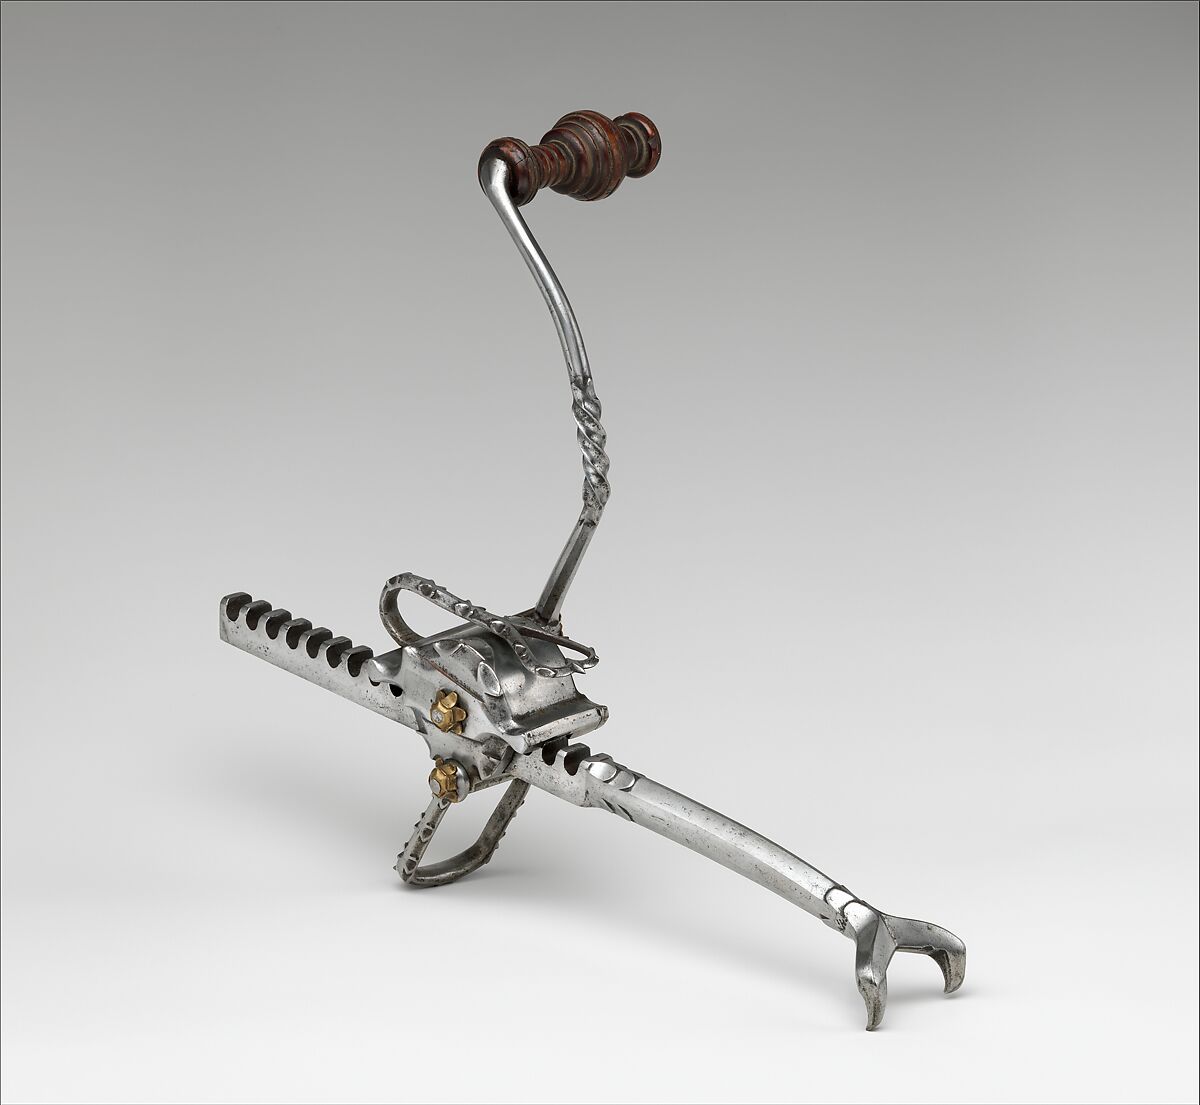 Cranequin from the Armory of Emperor Maximilan I (reigned 1493/1508–19), Steel, wood (fruitwood, possibly pear), copper alloy, Western or Central European, the Netherlands or Austria 